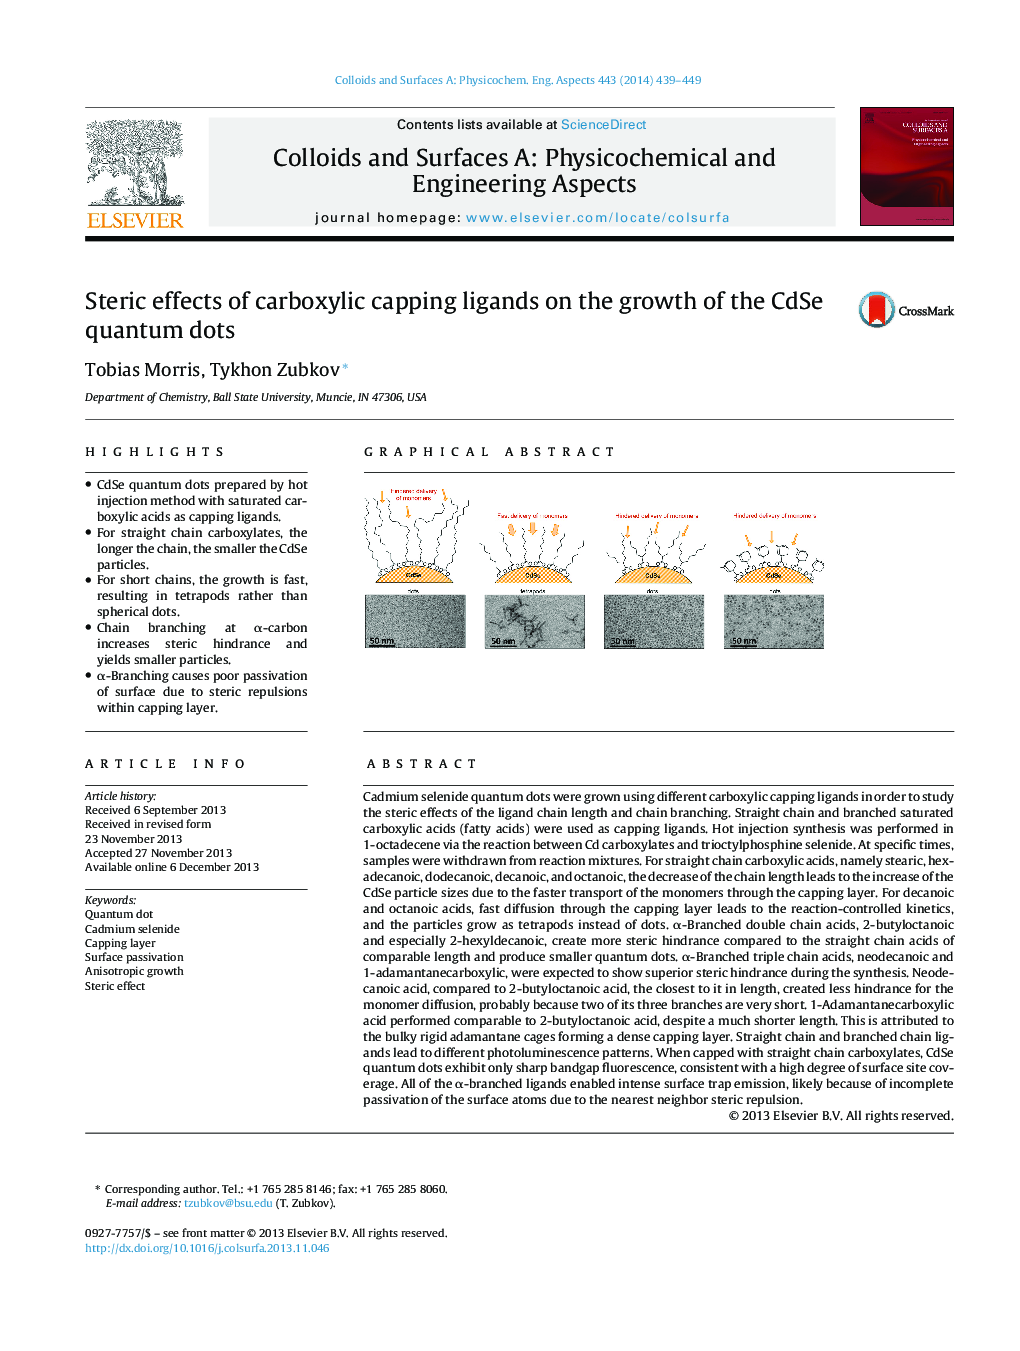 Steric effects of carboxylic capping ligands on the growth of the CdSe quantum dots